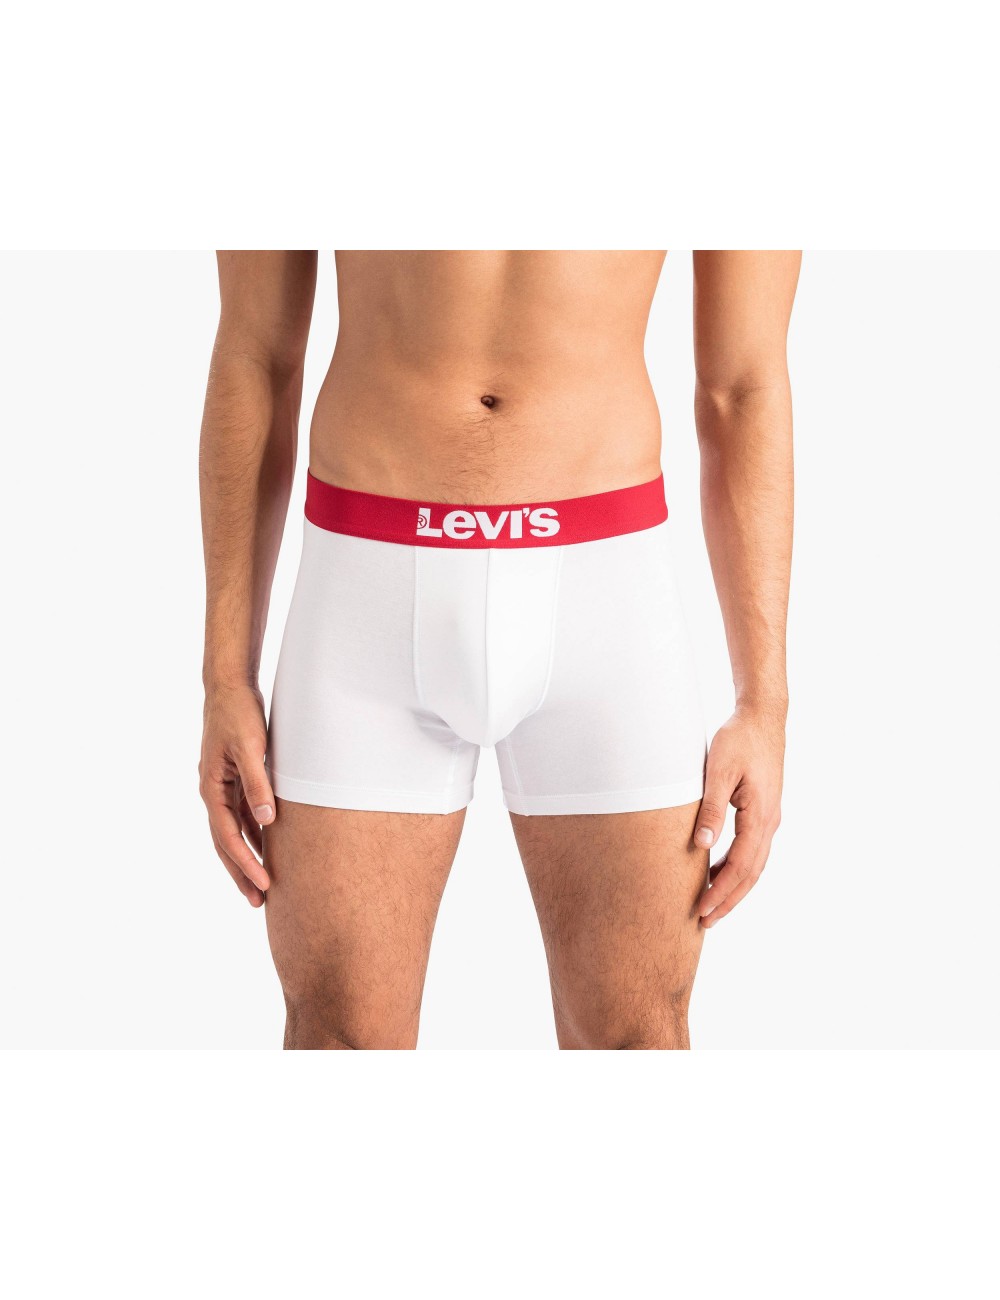 Levis 200sf boxer Brief 2pack blanco